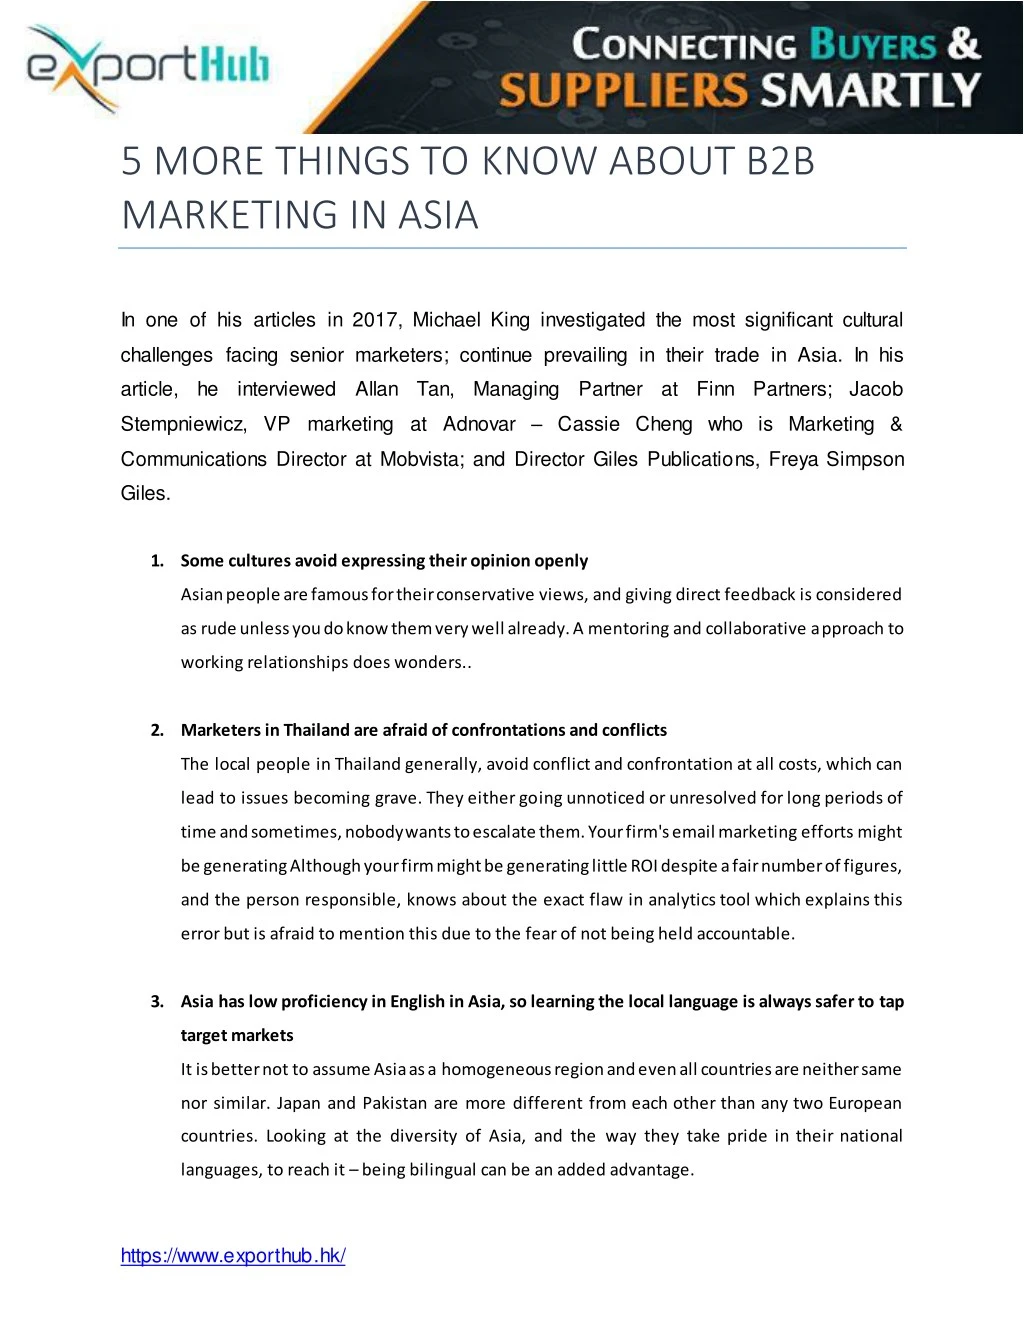 5 more things to know about b2b marketing in asia